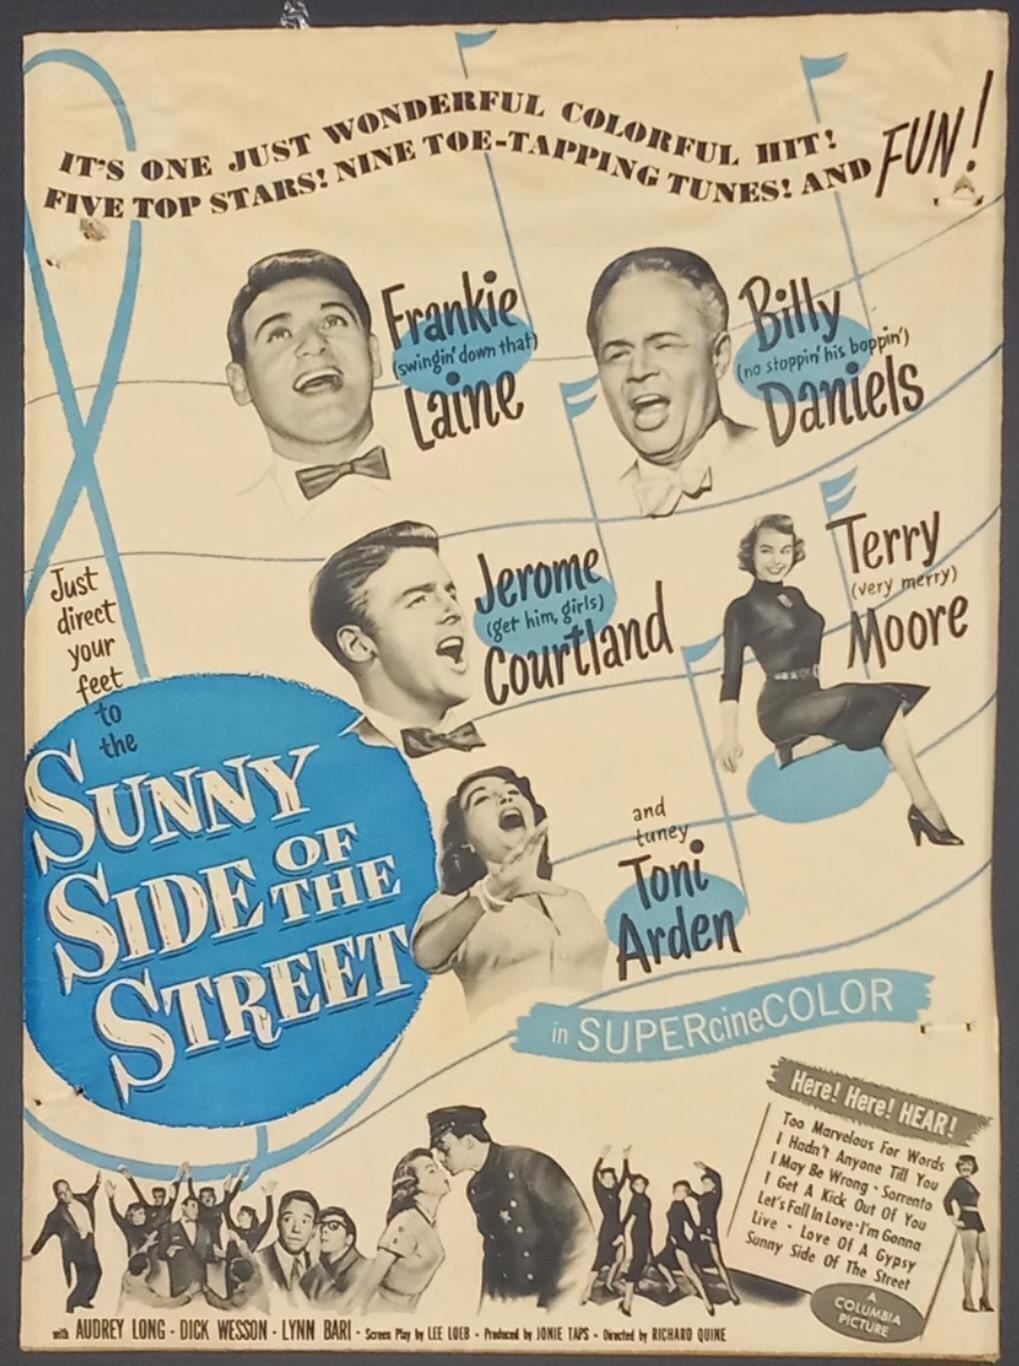 1951 SUNNY SIDE OF THE STREET MOVIE FRANKIE LAINE VINTAGE ADVERTISMENT OS1